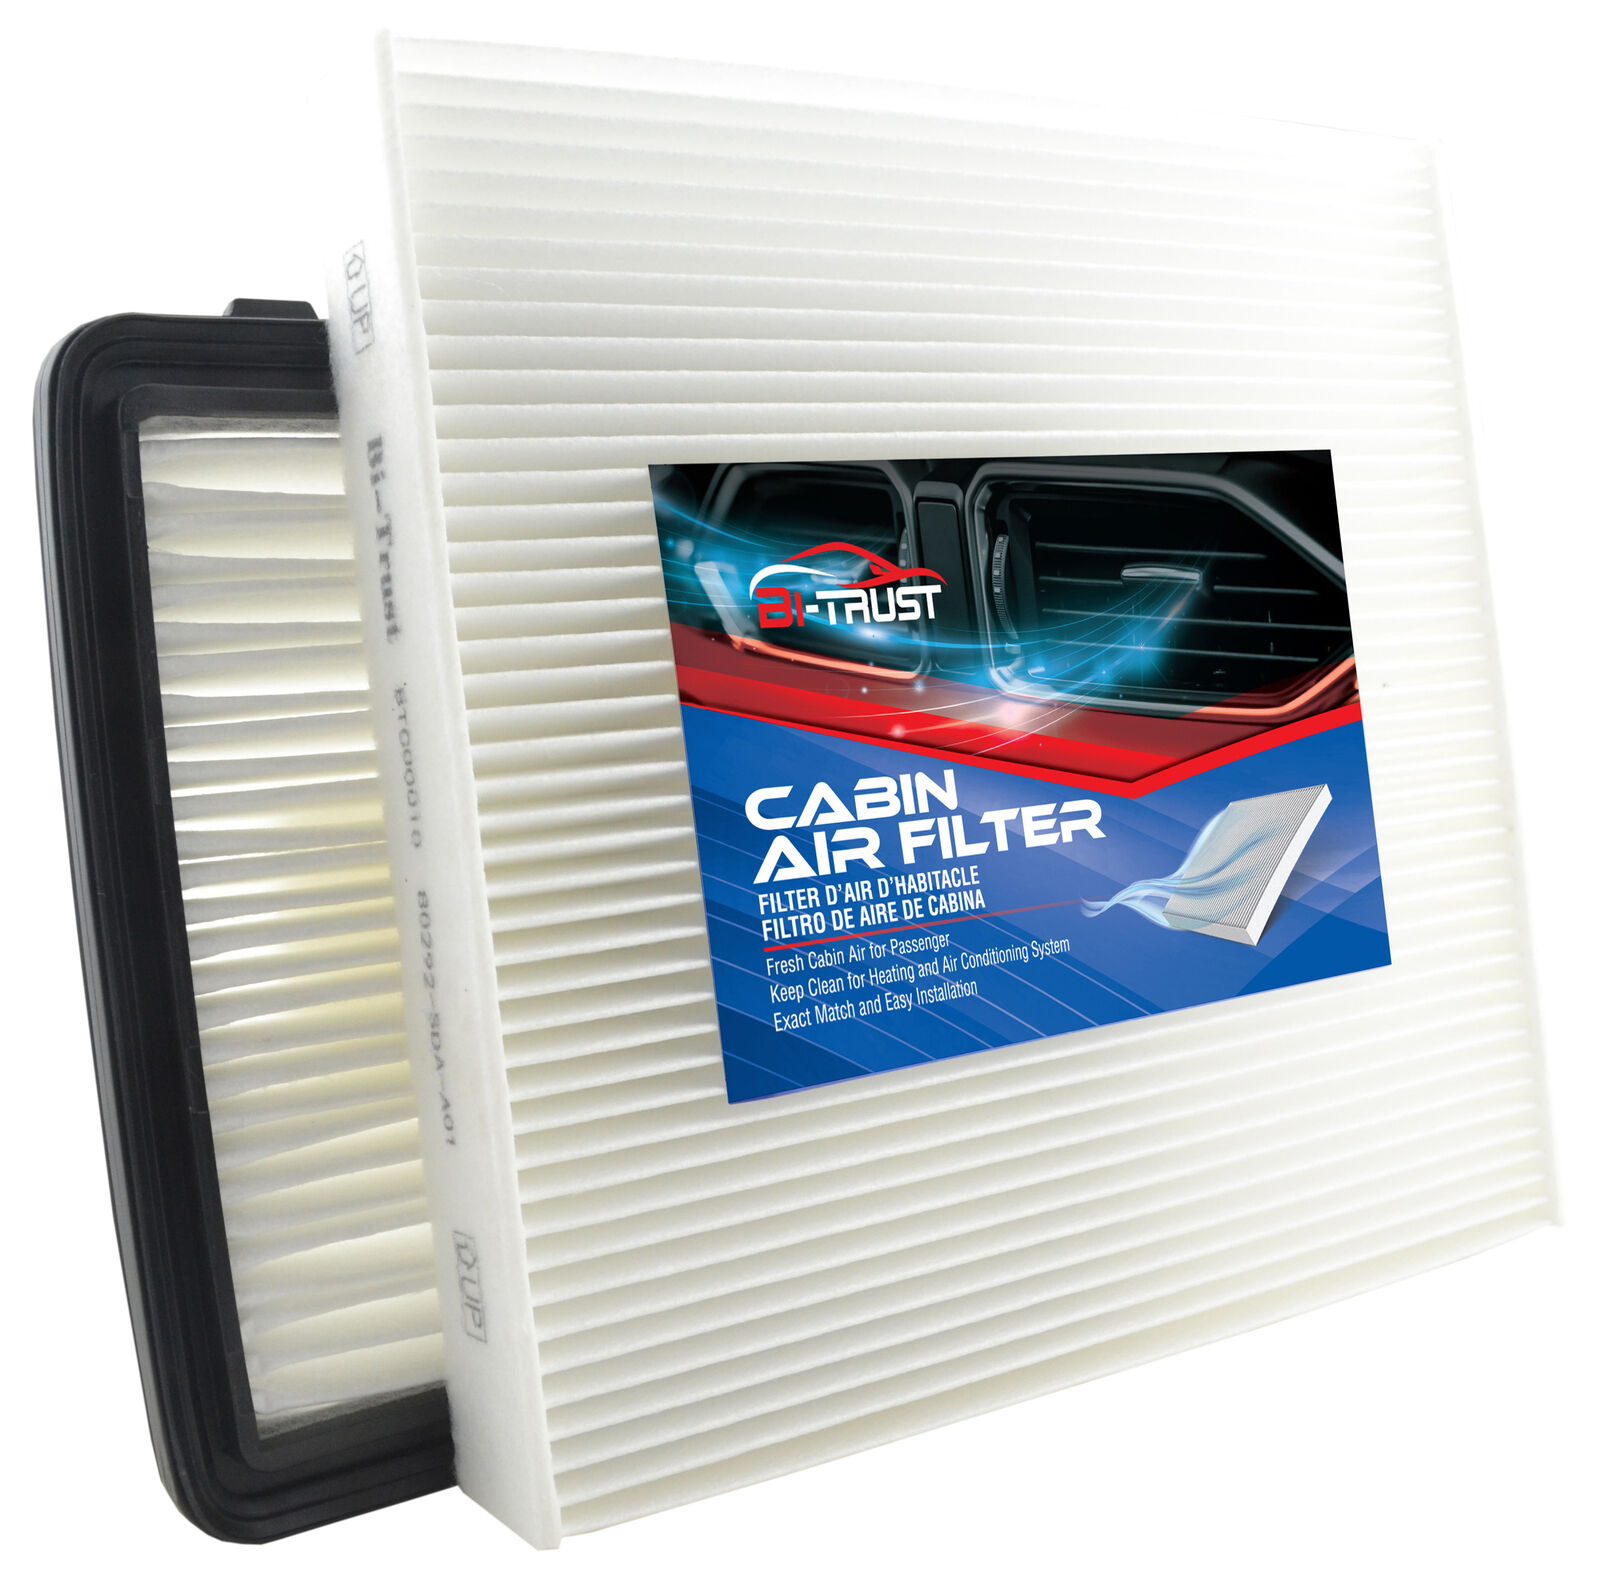 Engine & Cabin Air Filter Combo Set for Honda Civic 1.3L 2006-2011 17220-RMX-000